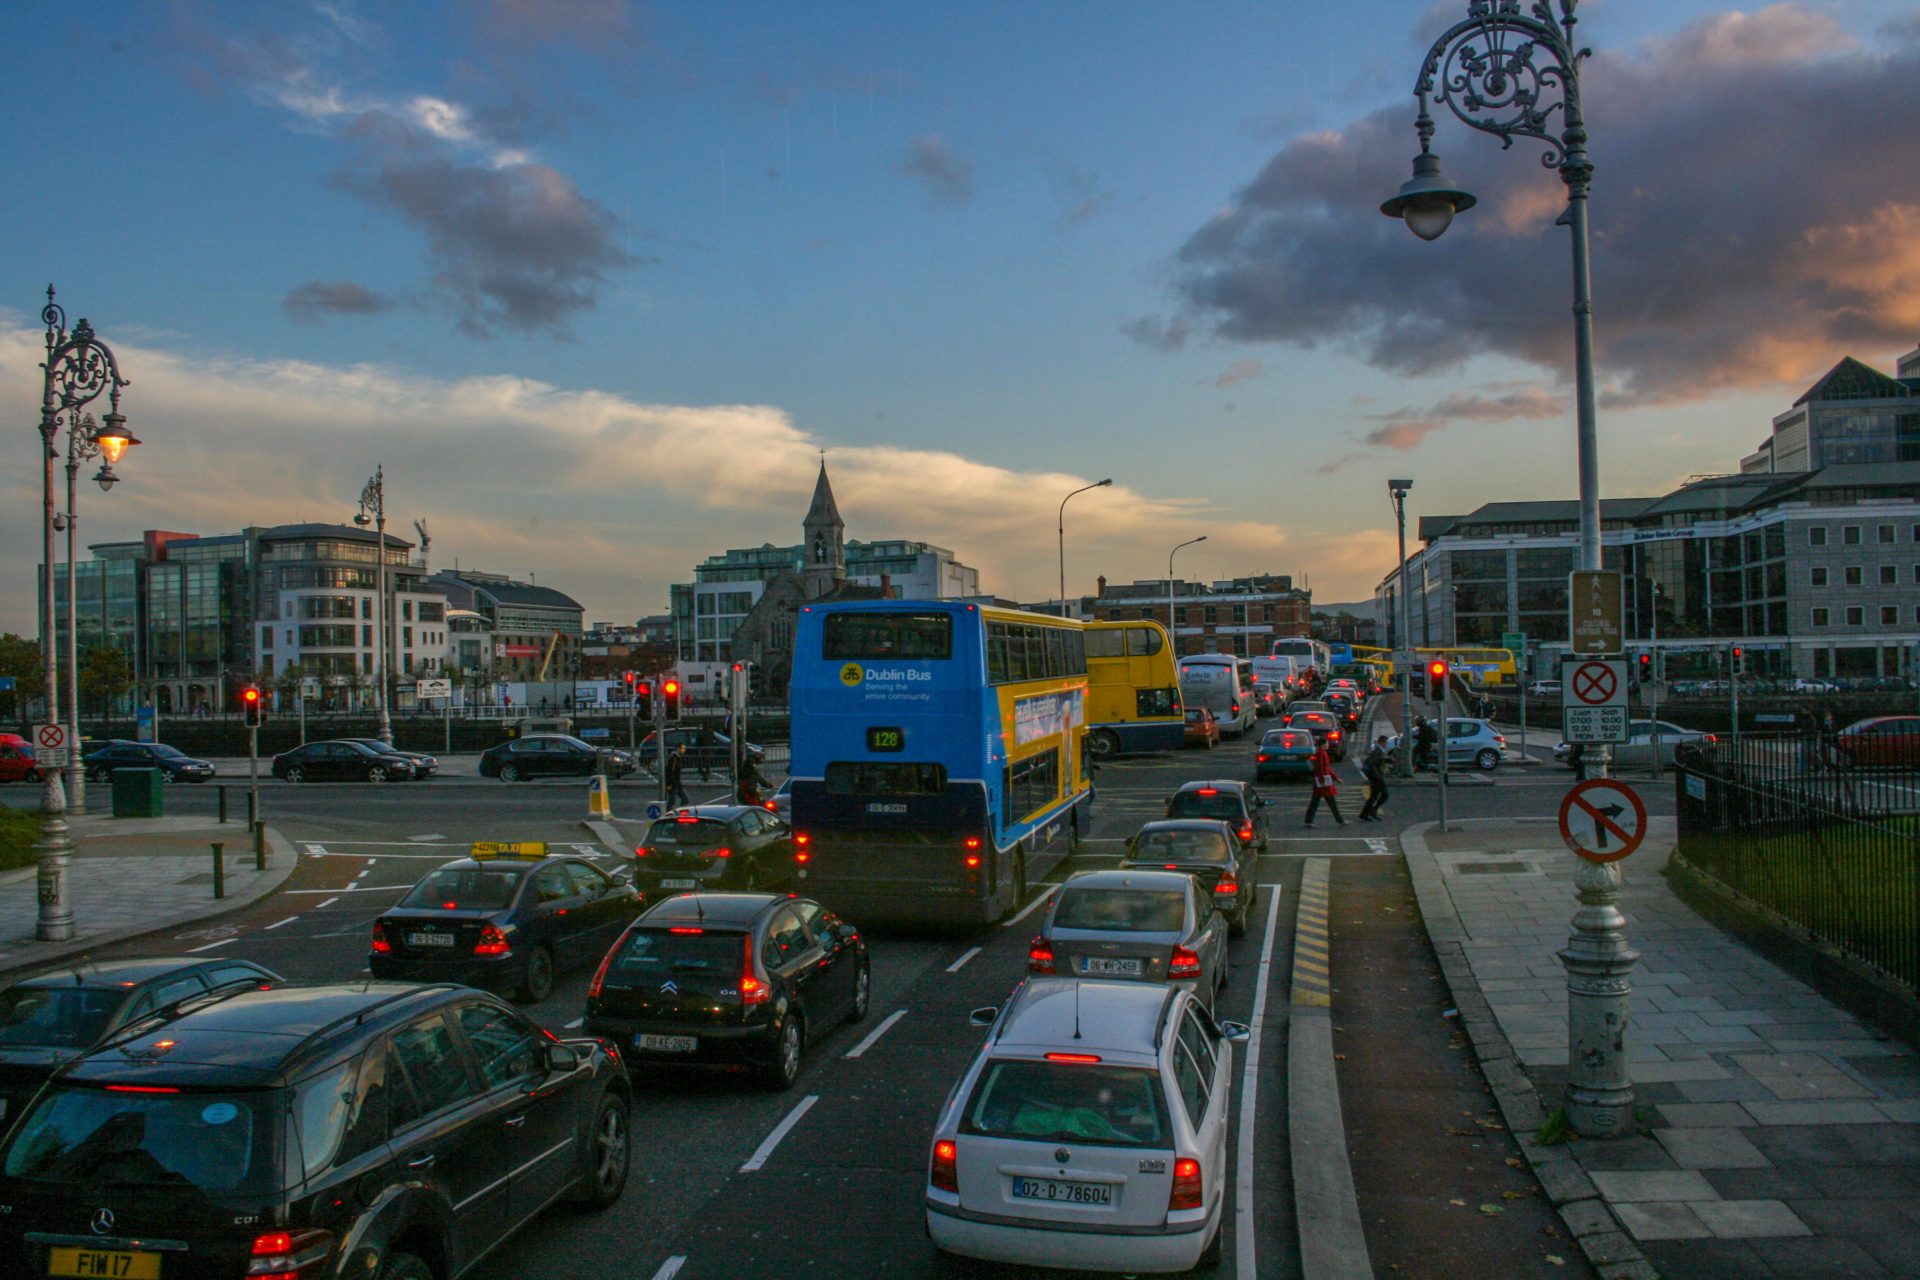 Dublin Ireland, traffic jam during rush hour. Commuters rushing home as the sun sets creating a backlog of traffic.